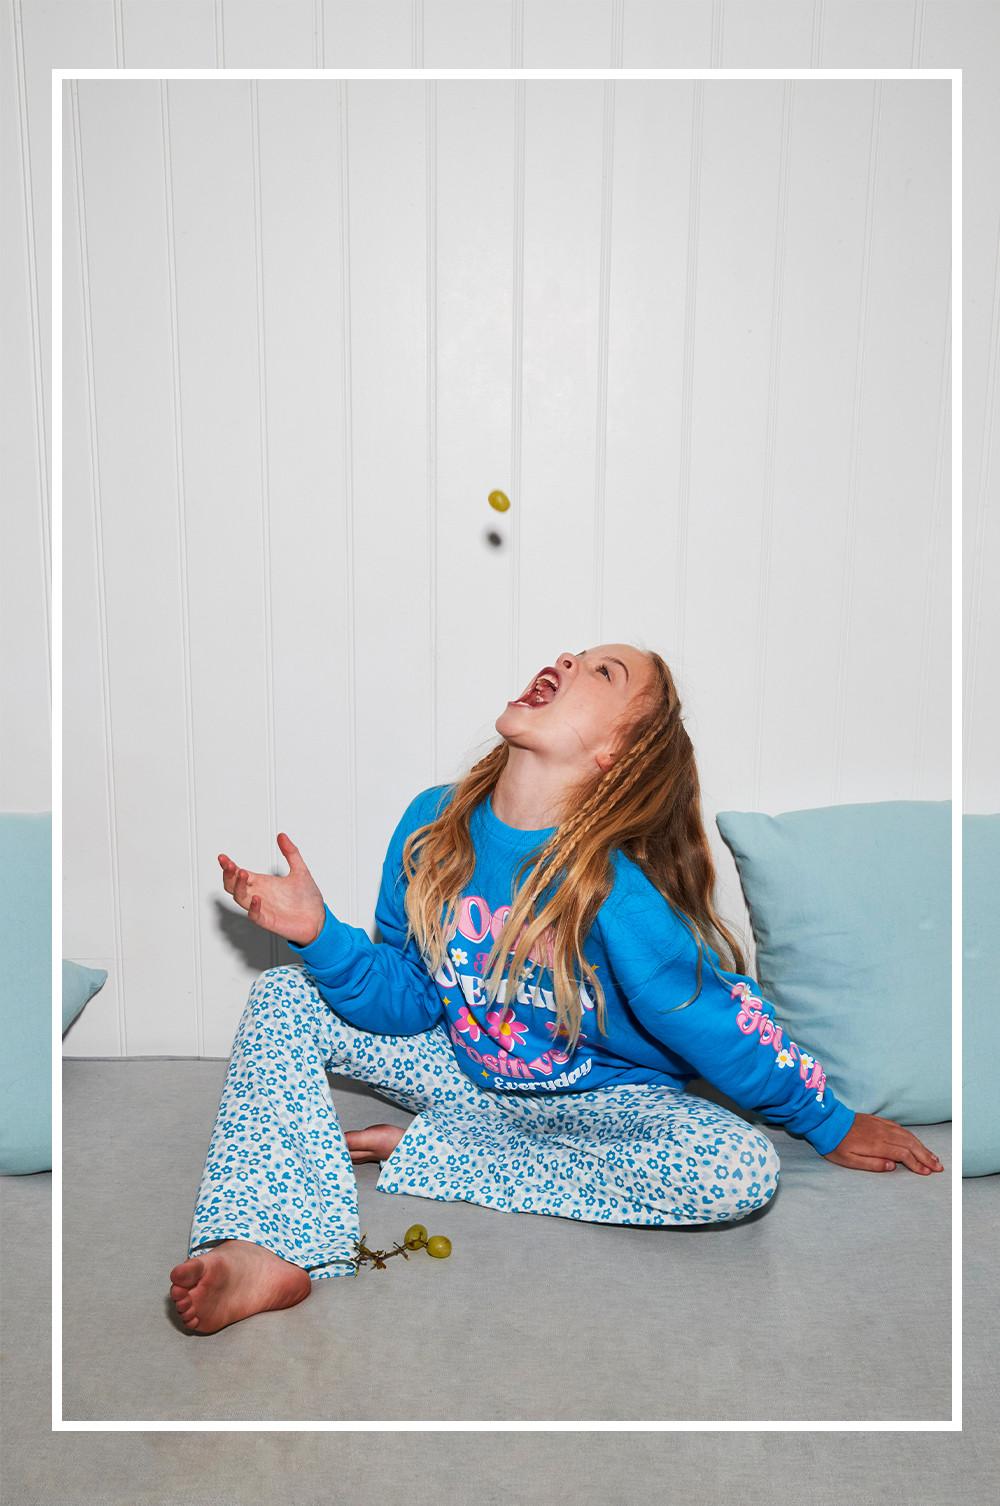 Child wears blue floral flares and blue graphic sweatshirt